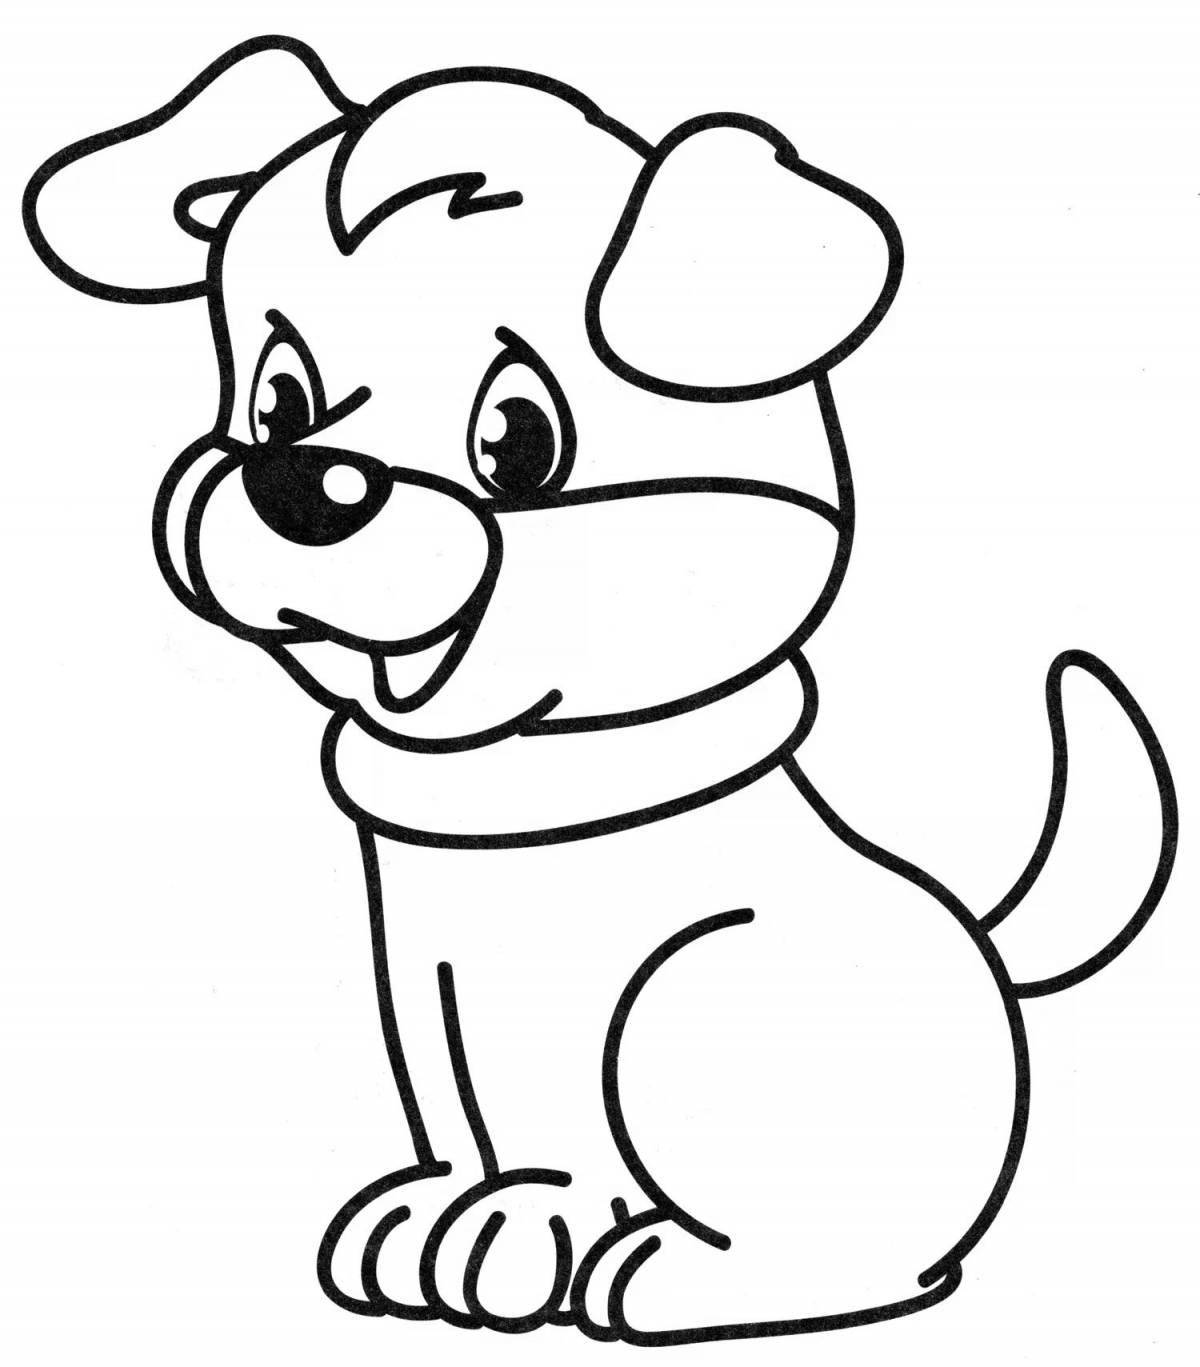 Puppy playful coloring for kids